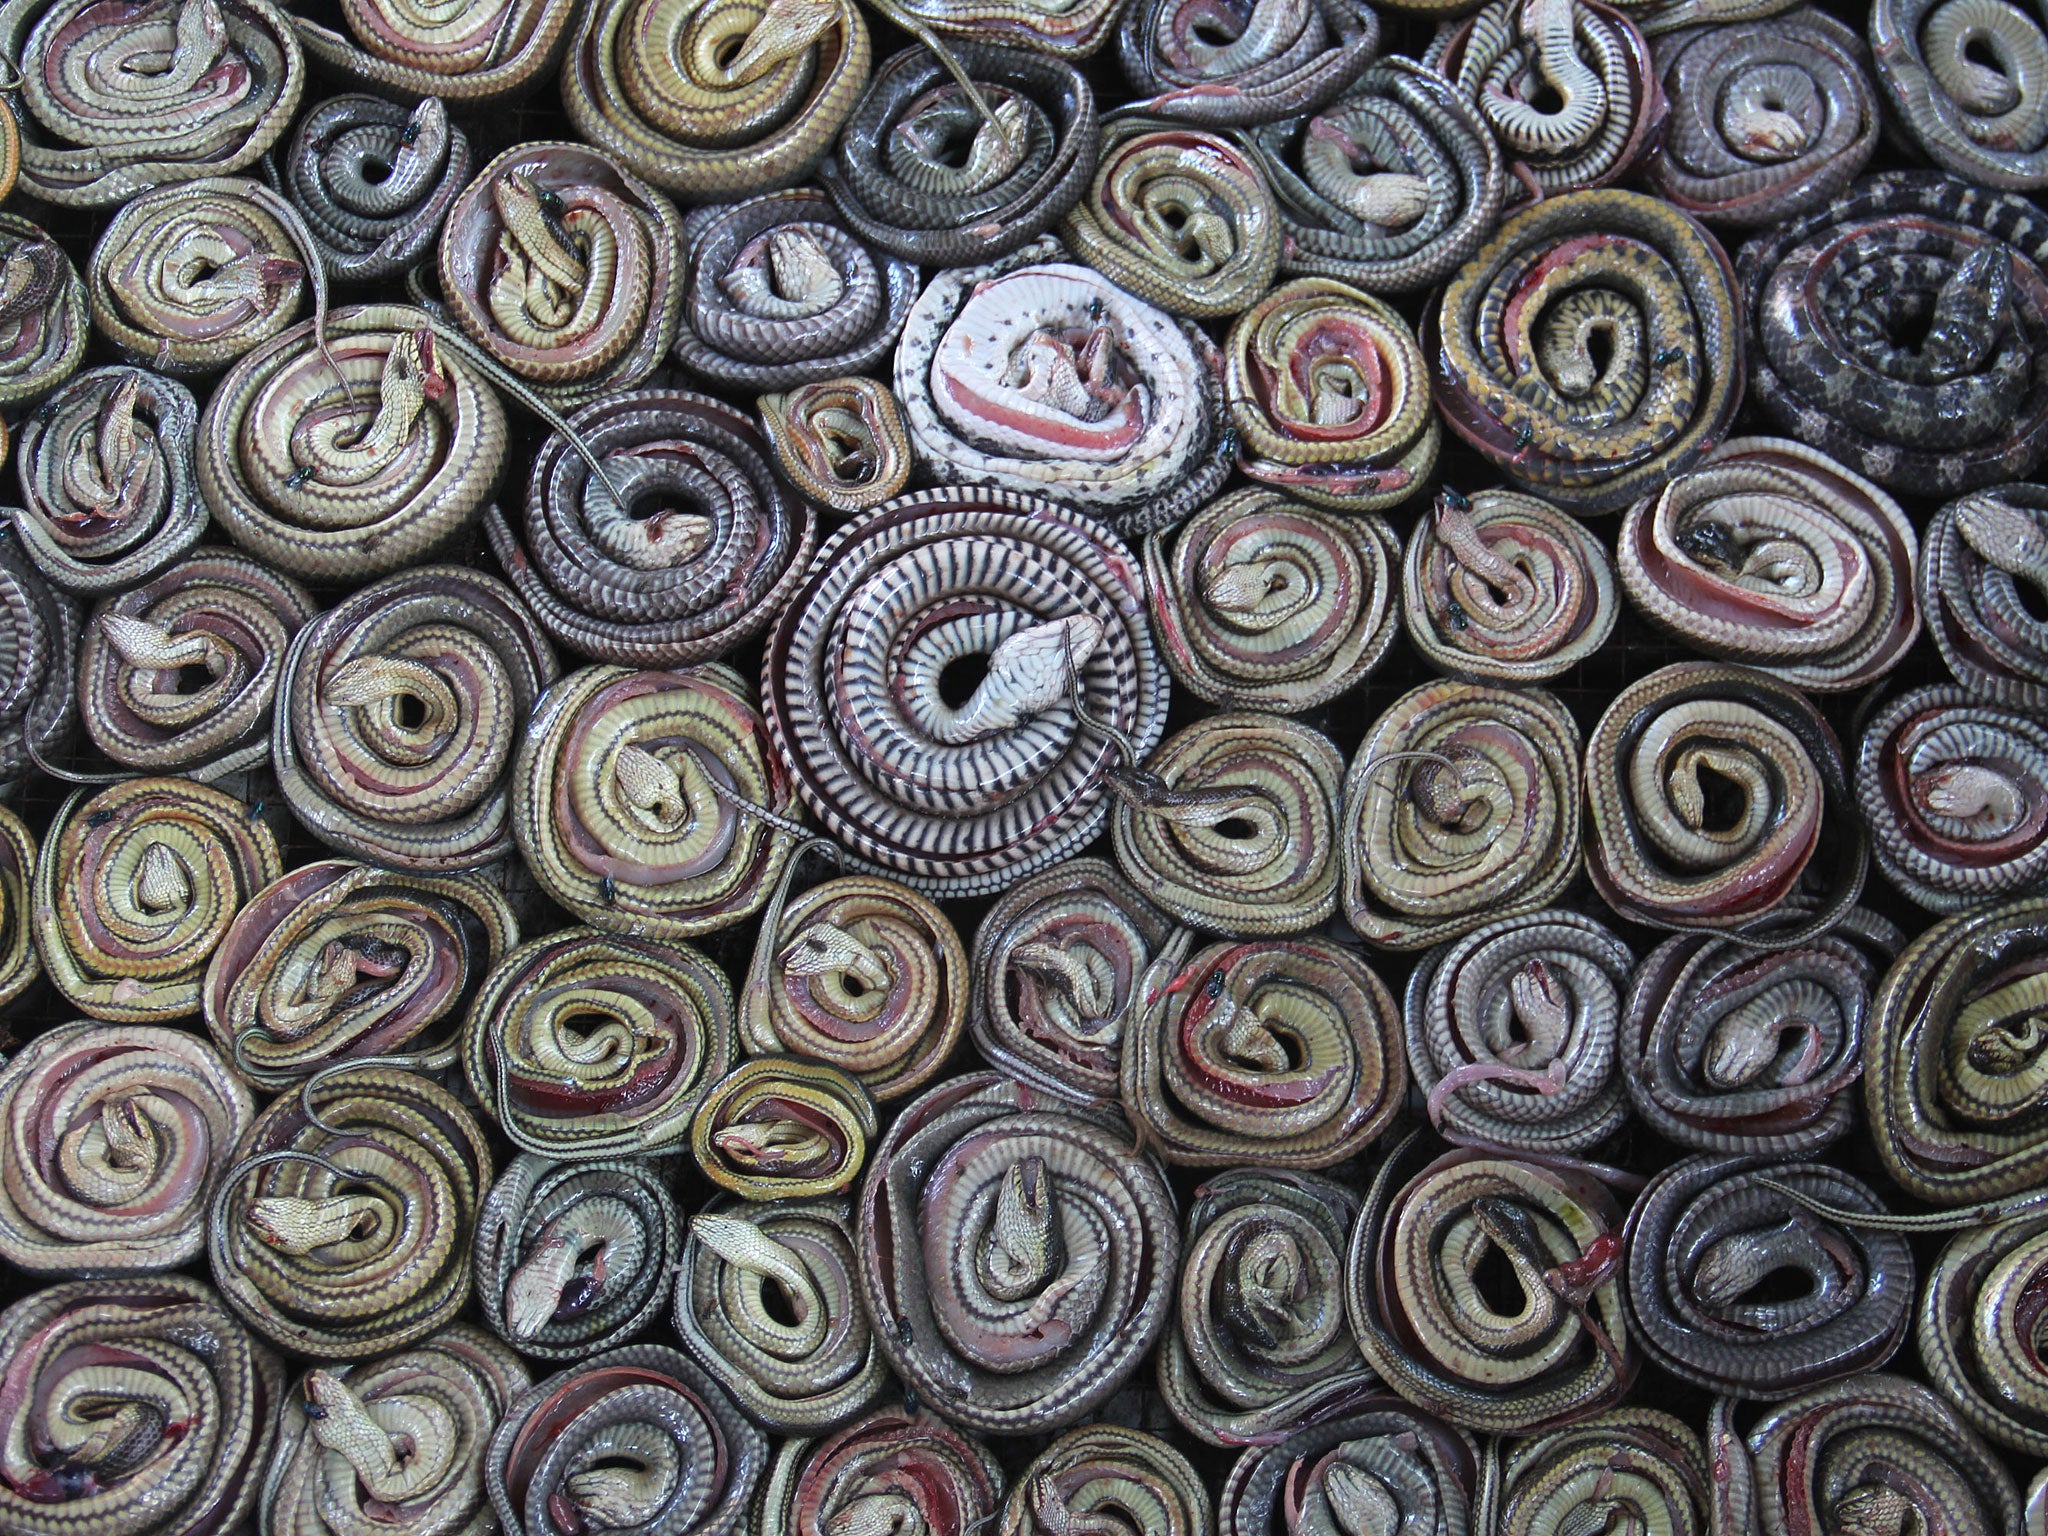 Snakes are collected and rolled before putting into the oven in the village of Kertasura, Cirebon